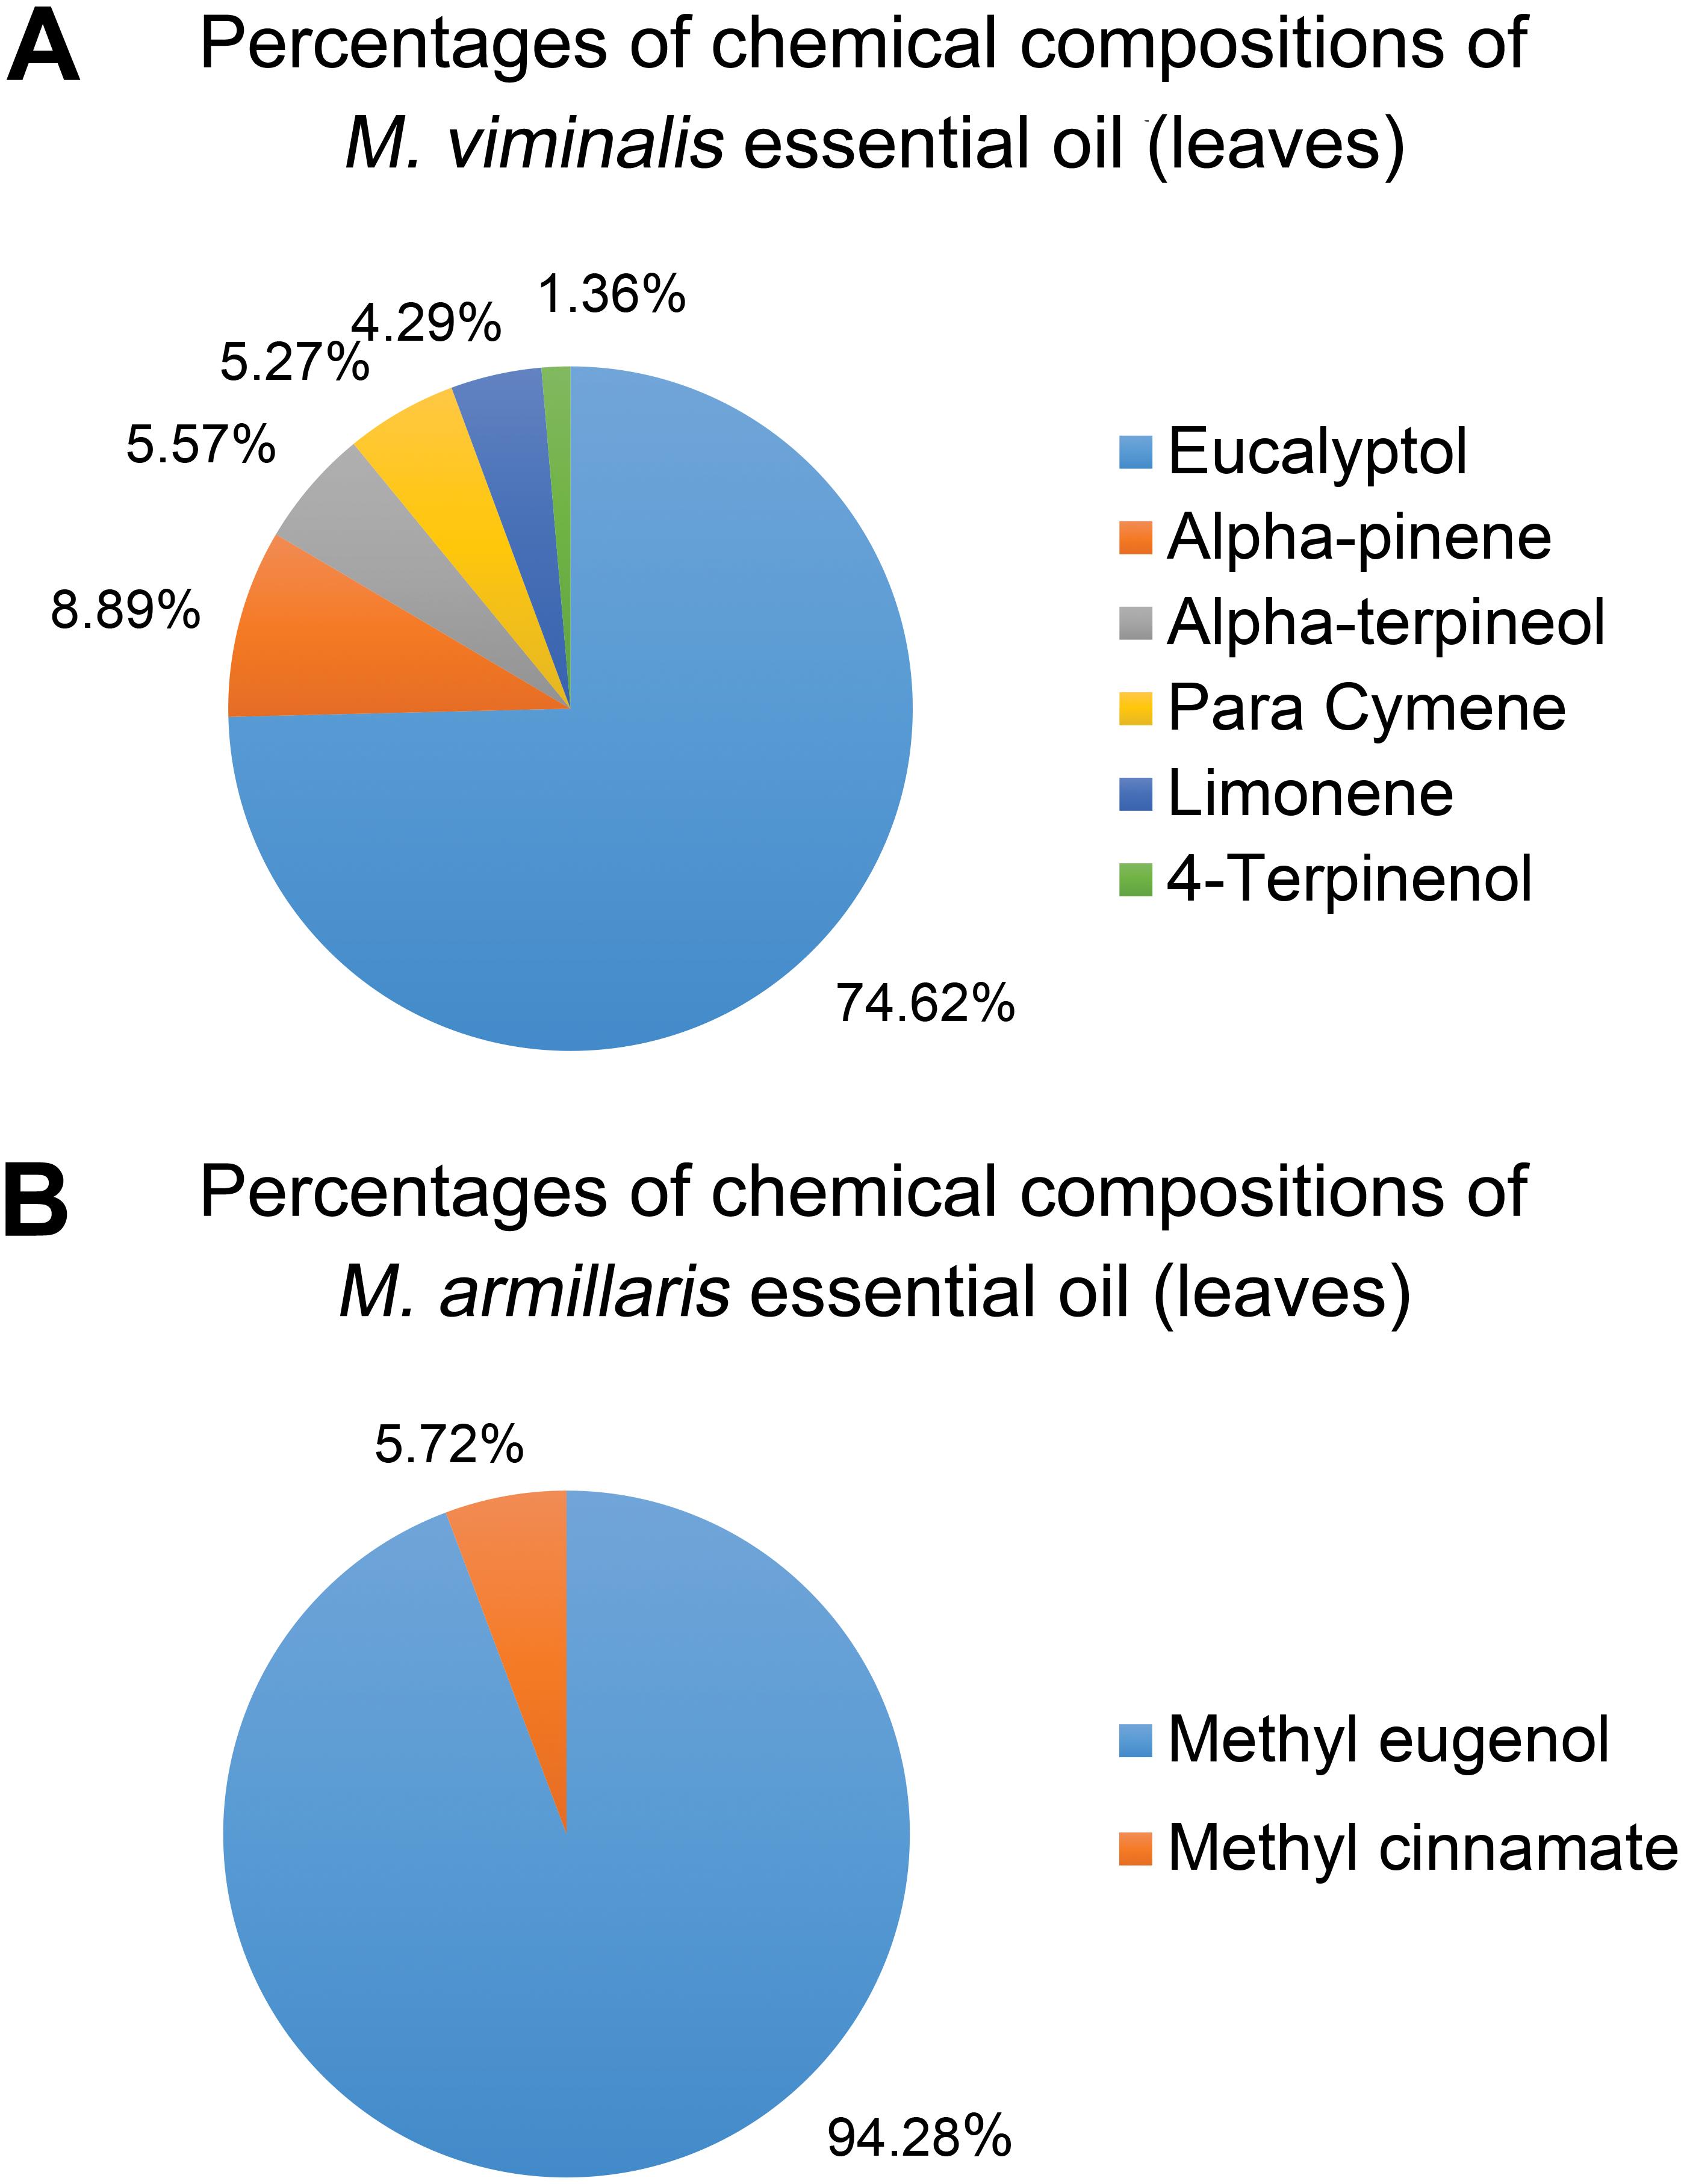 Percentages of chemical compositions of M. viminalis and M. armillaris essential oil (leaves).